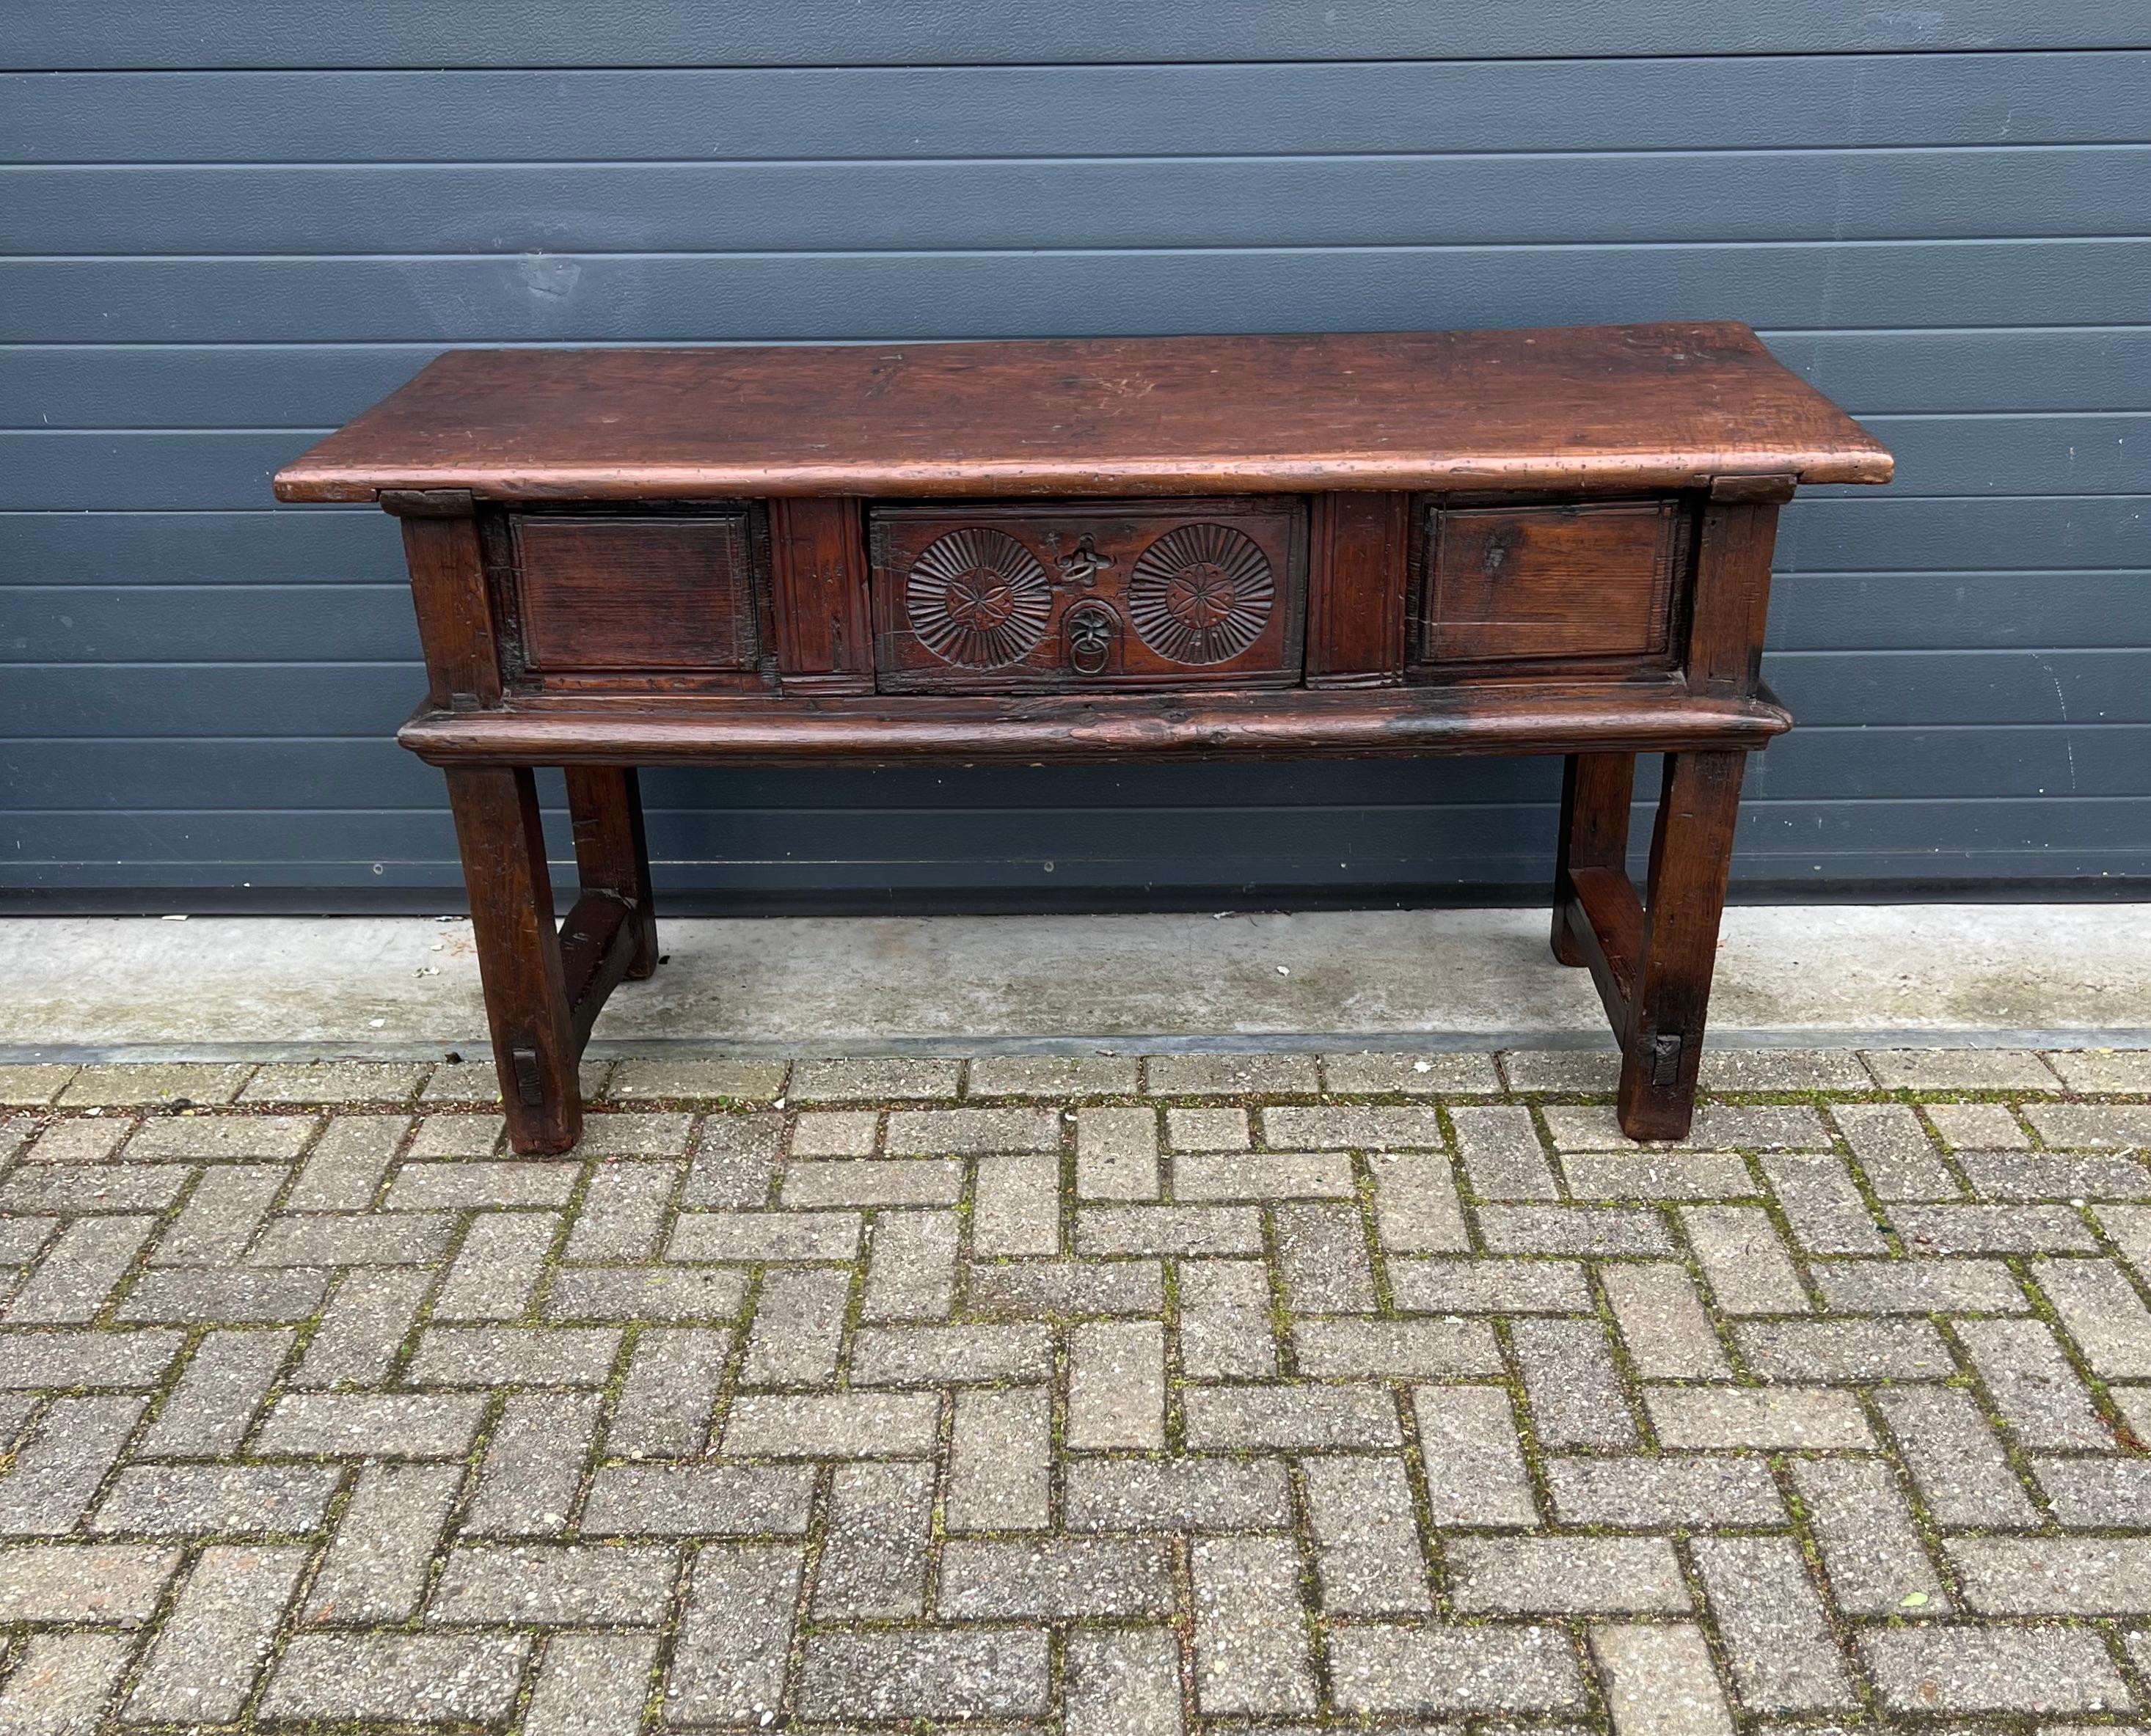 Antique and Rustic Mid 1700s Carved Chestnut Spanish Countryside Console Table For Sale 14